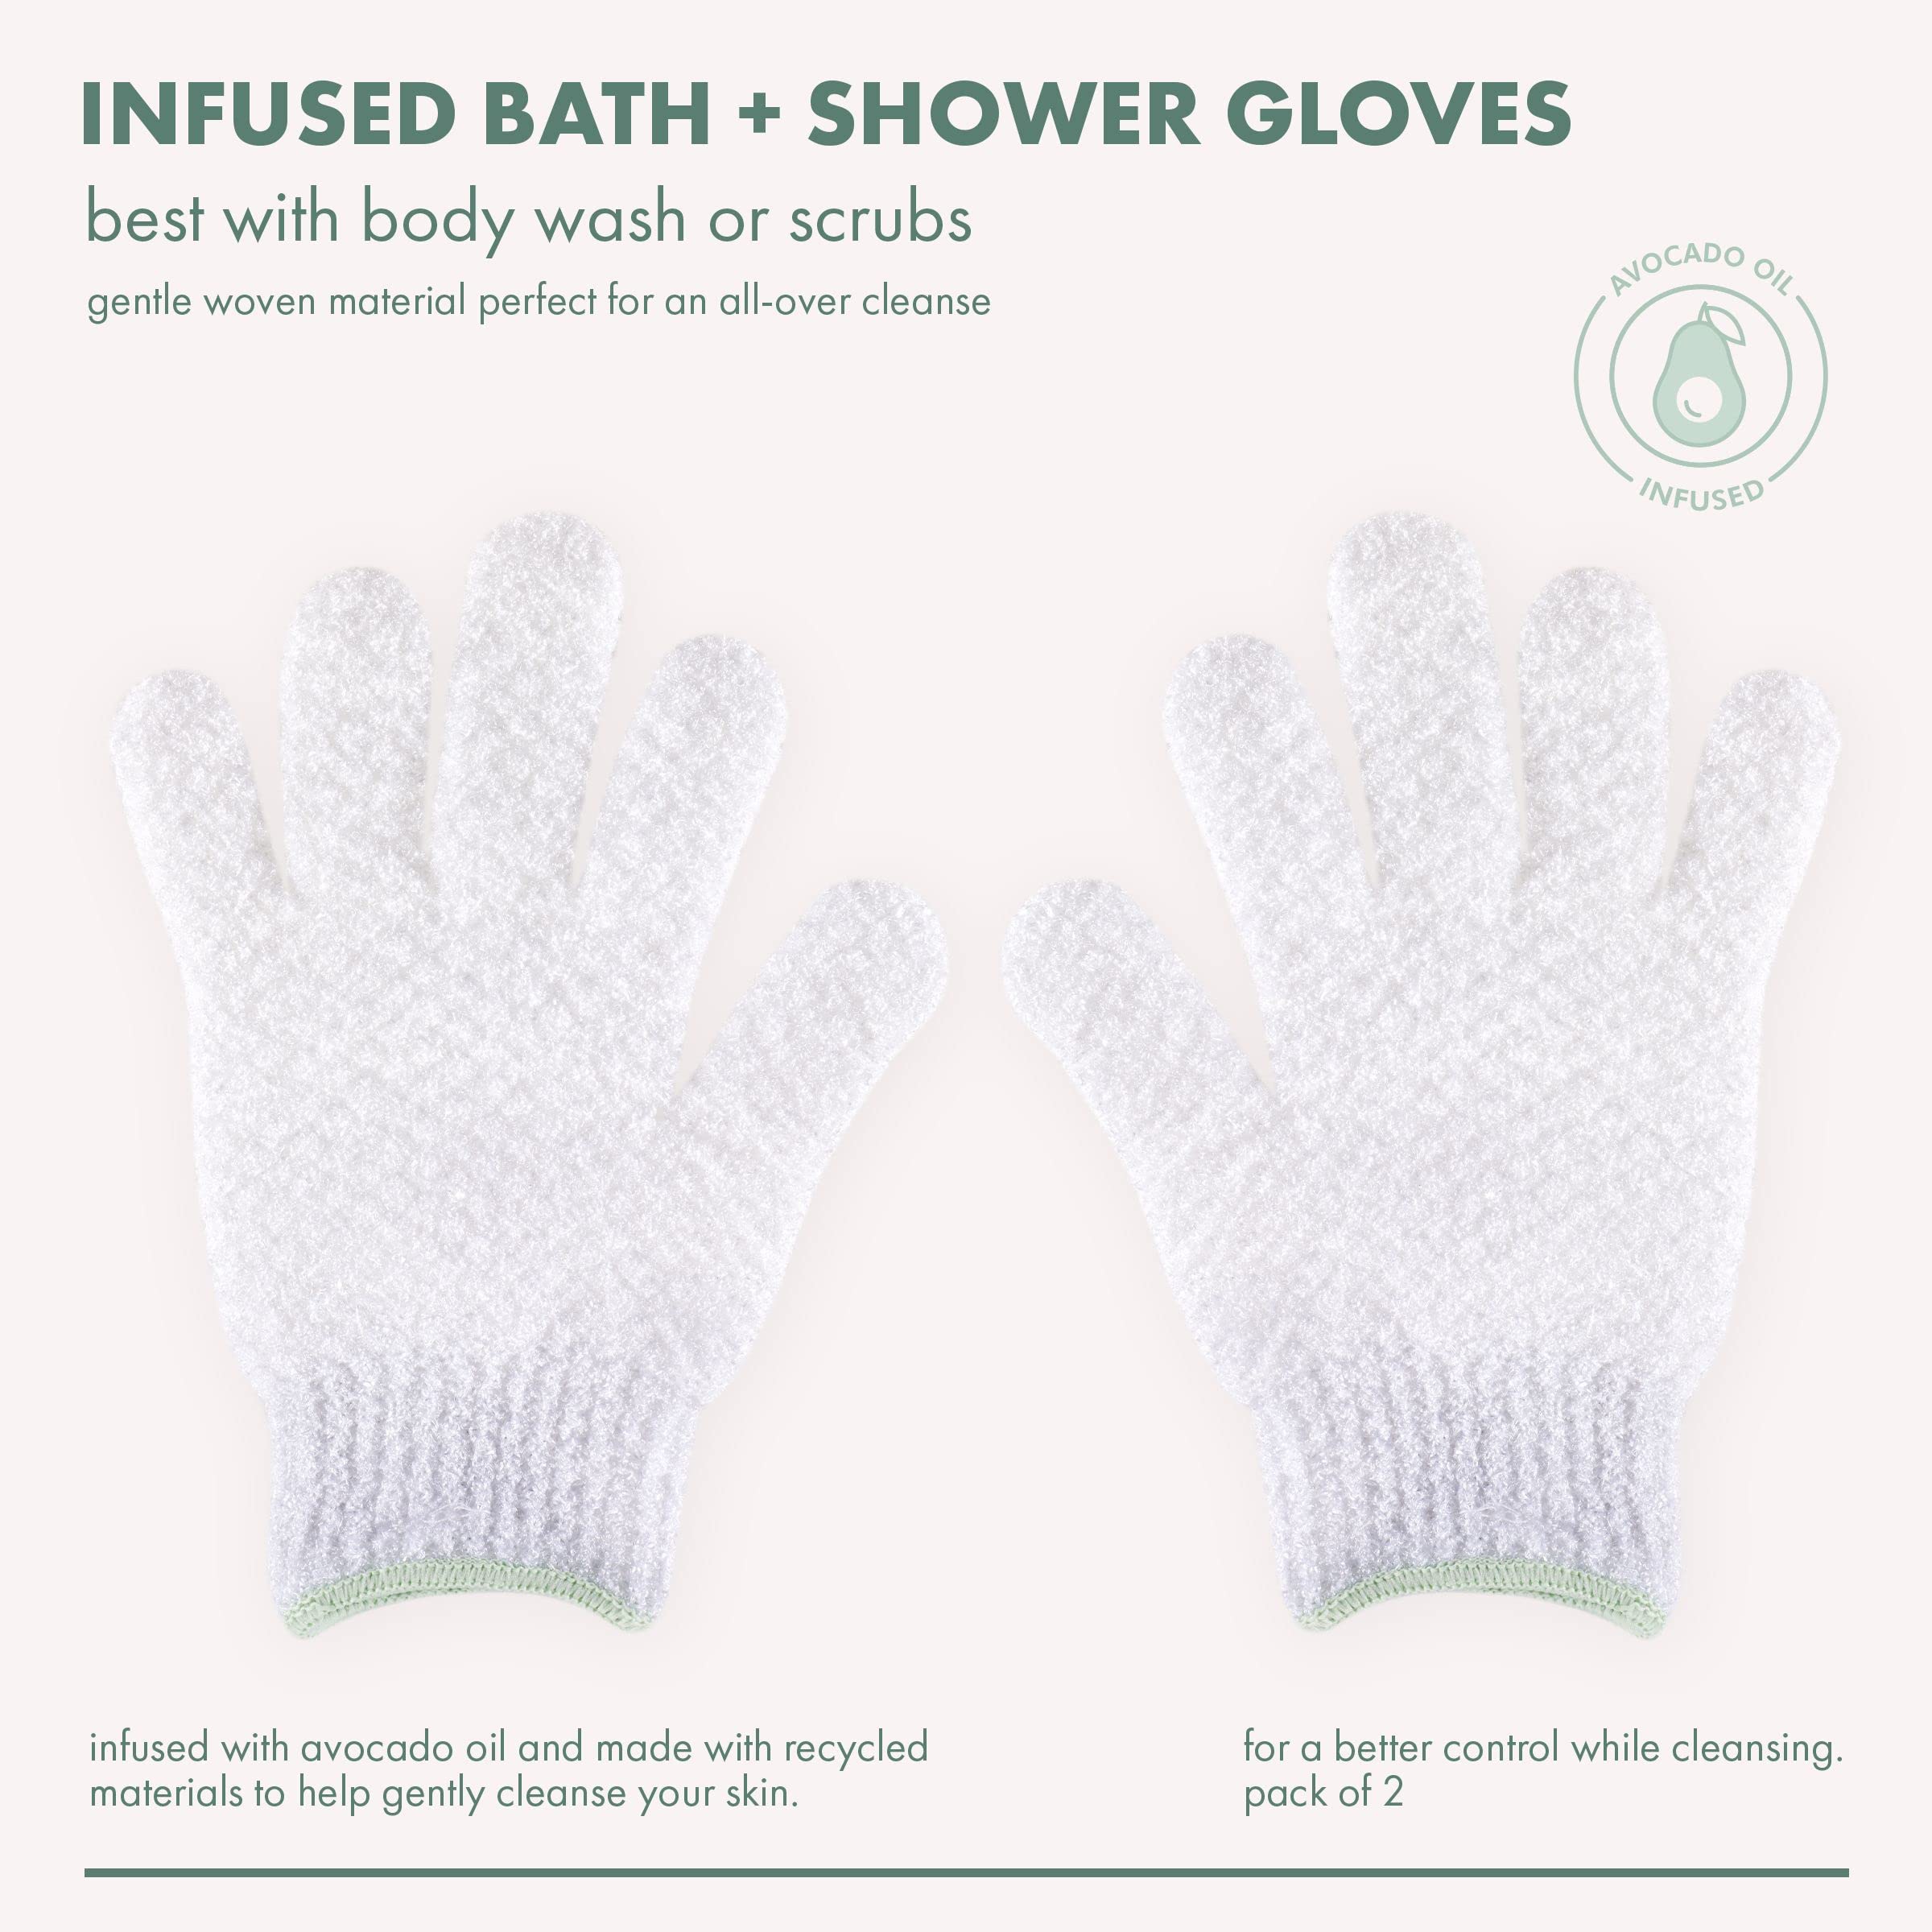 EcoTools Avocado Oil Infused Gentle Exfoliating Bath & Shower Gloves, Exfoliating Body Mitt for Soft Skin, Use with Body Soap, Cleansers & Scrubs, Eco-Friendly Pack of 1 Gloves, 2 Gloves Total